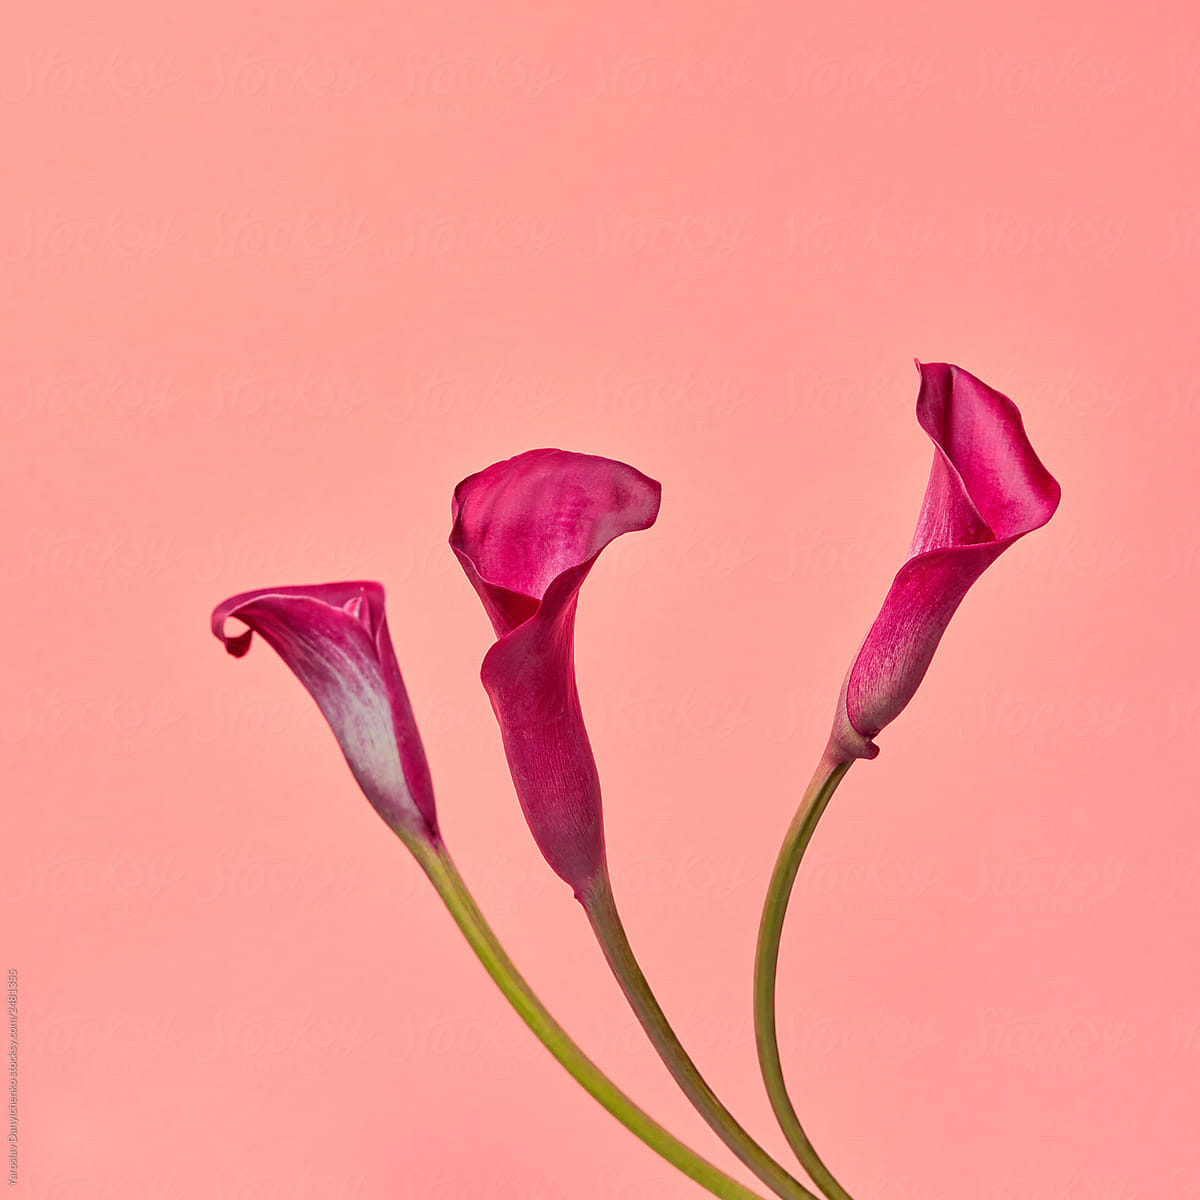 Composition from exotic flowers Zantedeschia presented on a pink background with copy space. Postcard